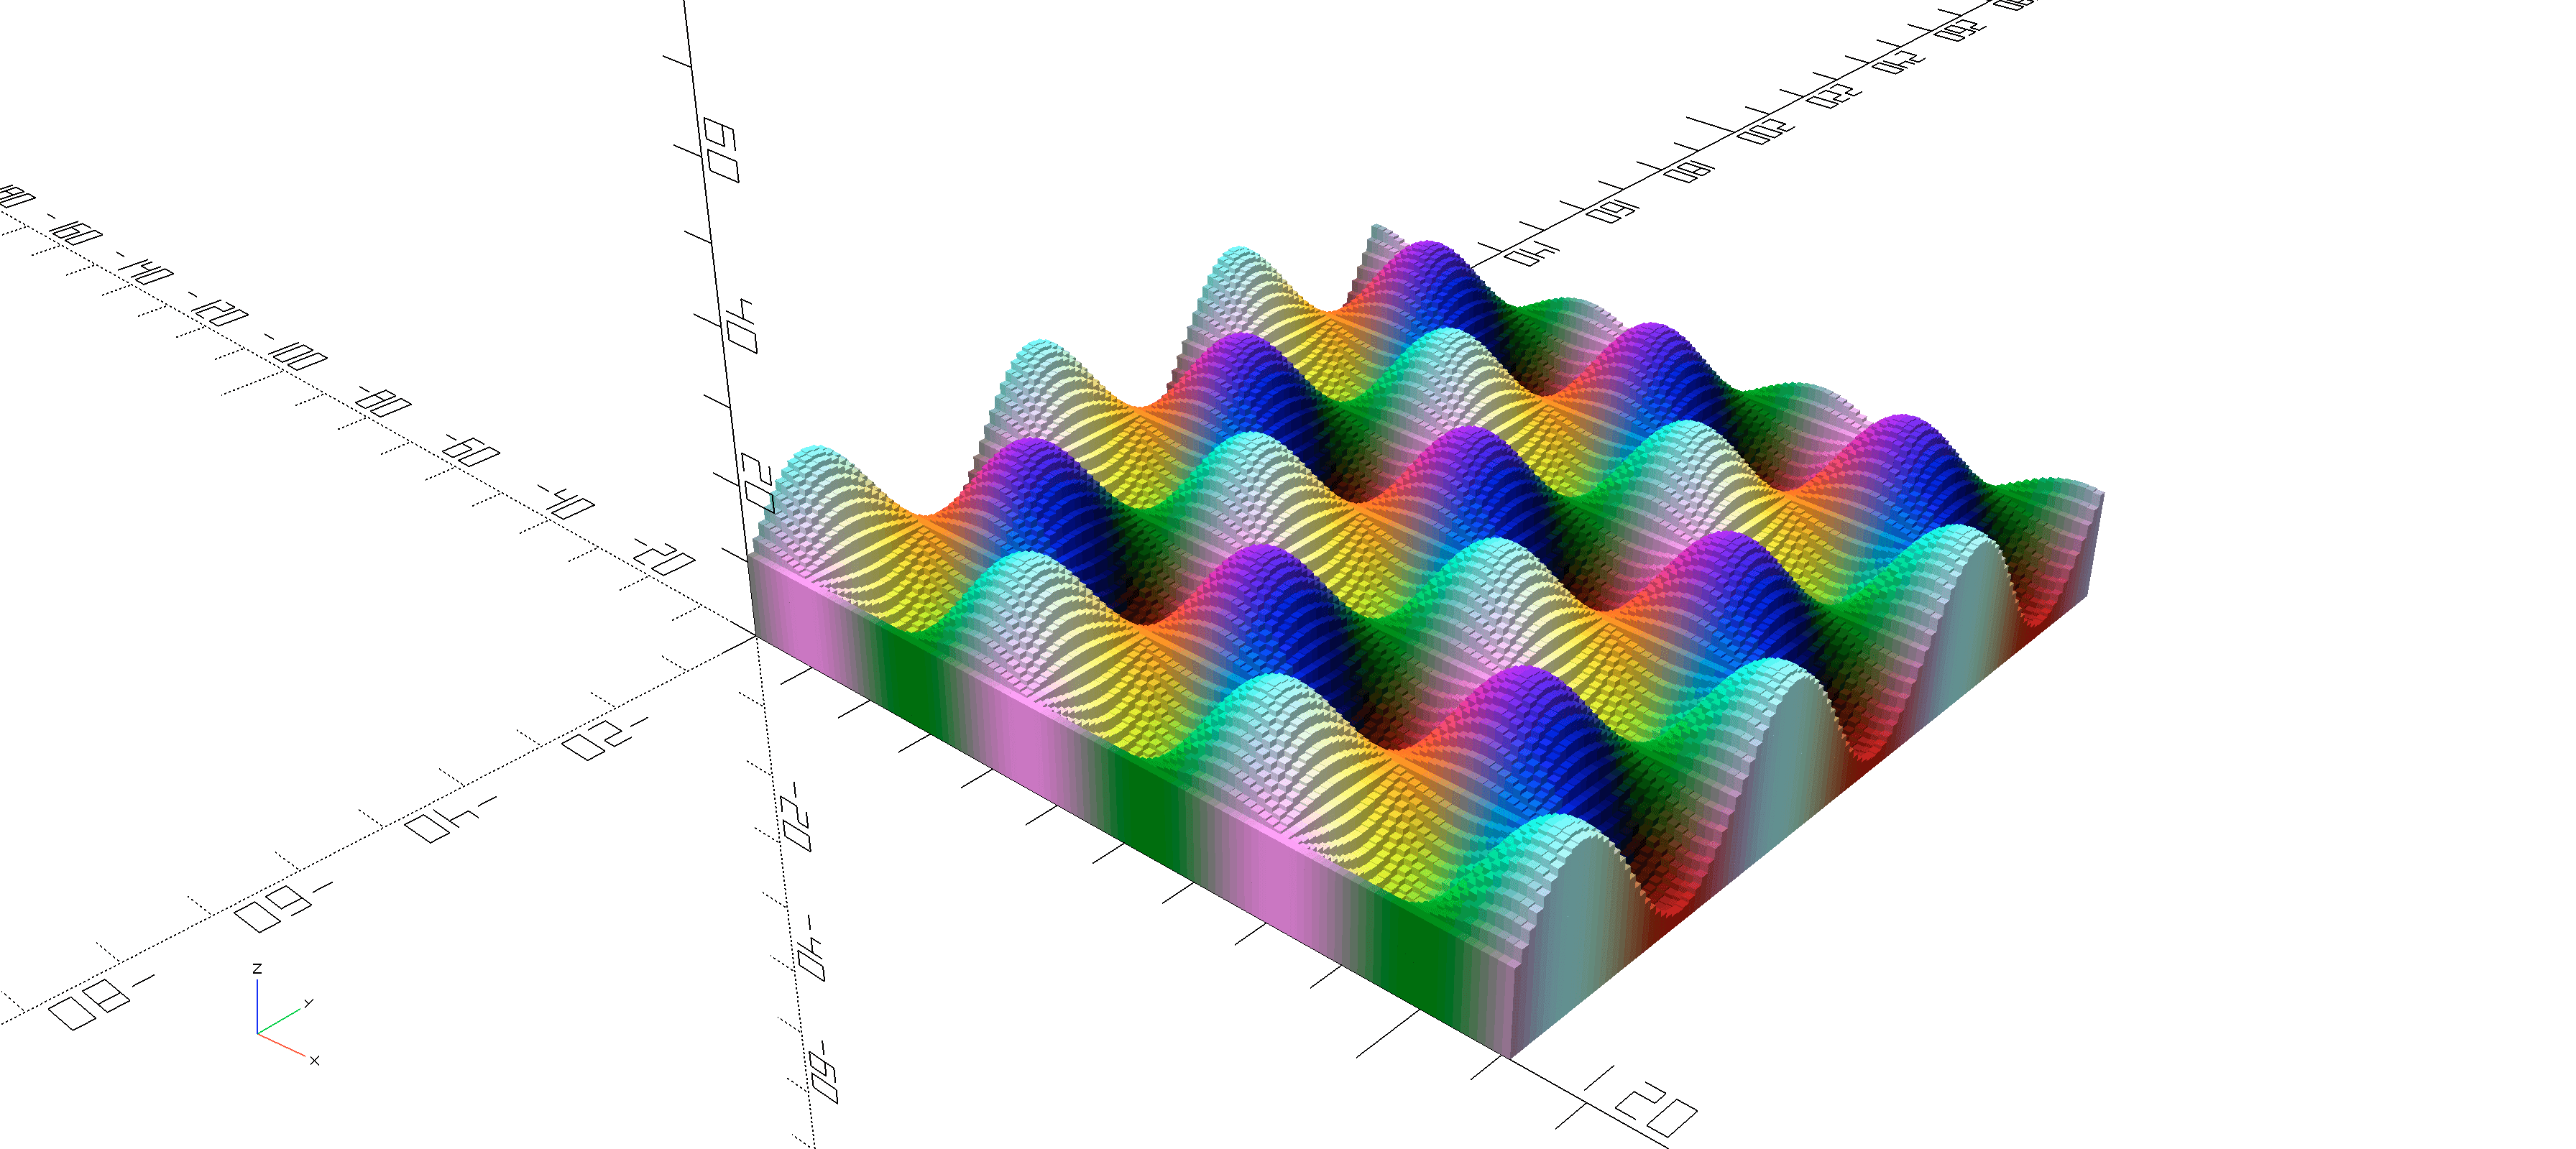 A 3D CAD workspace populated with a repeating sinusoidal wave colorized according to coordinate.